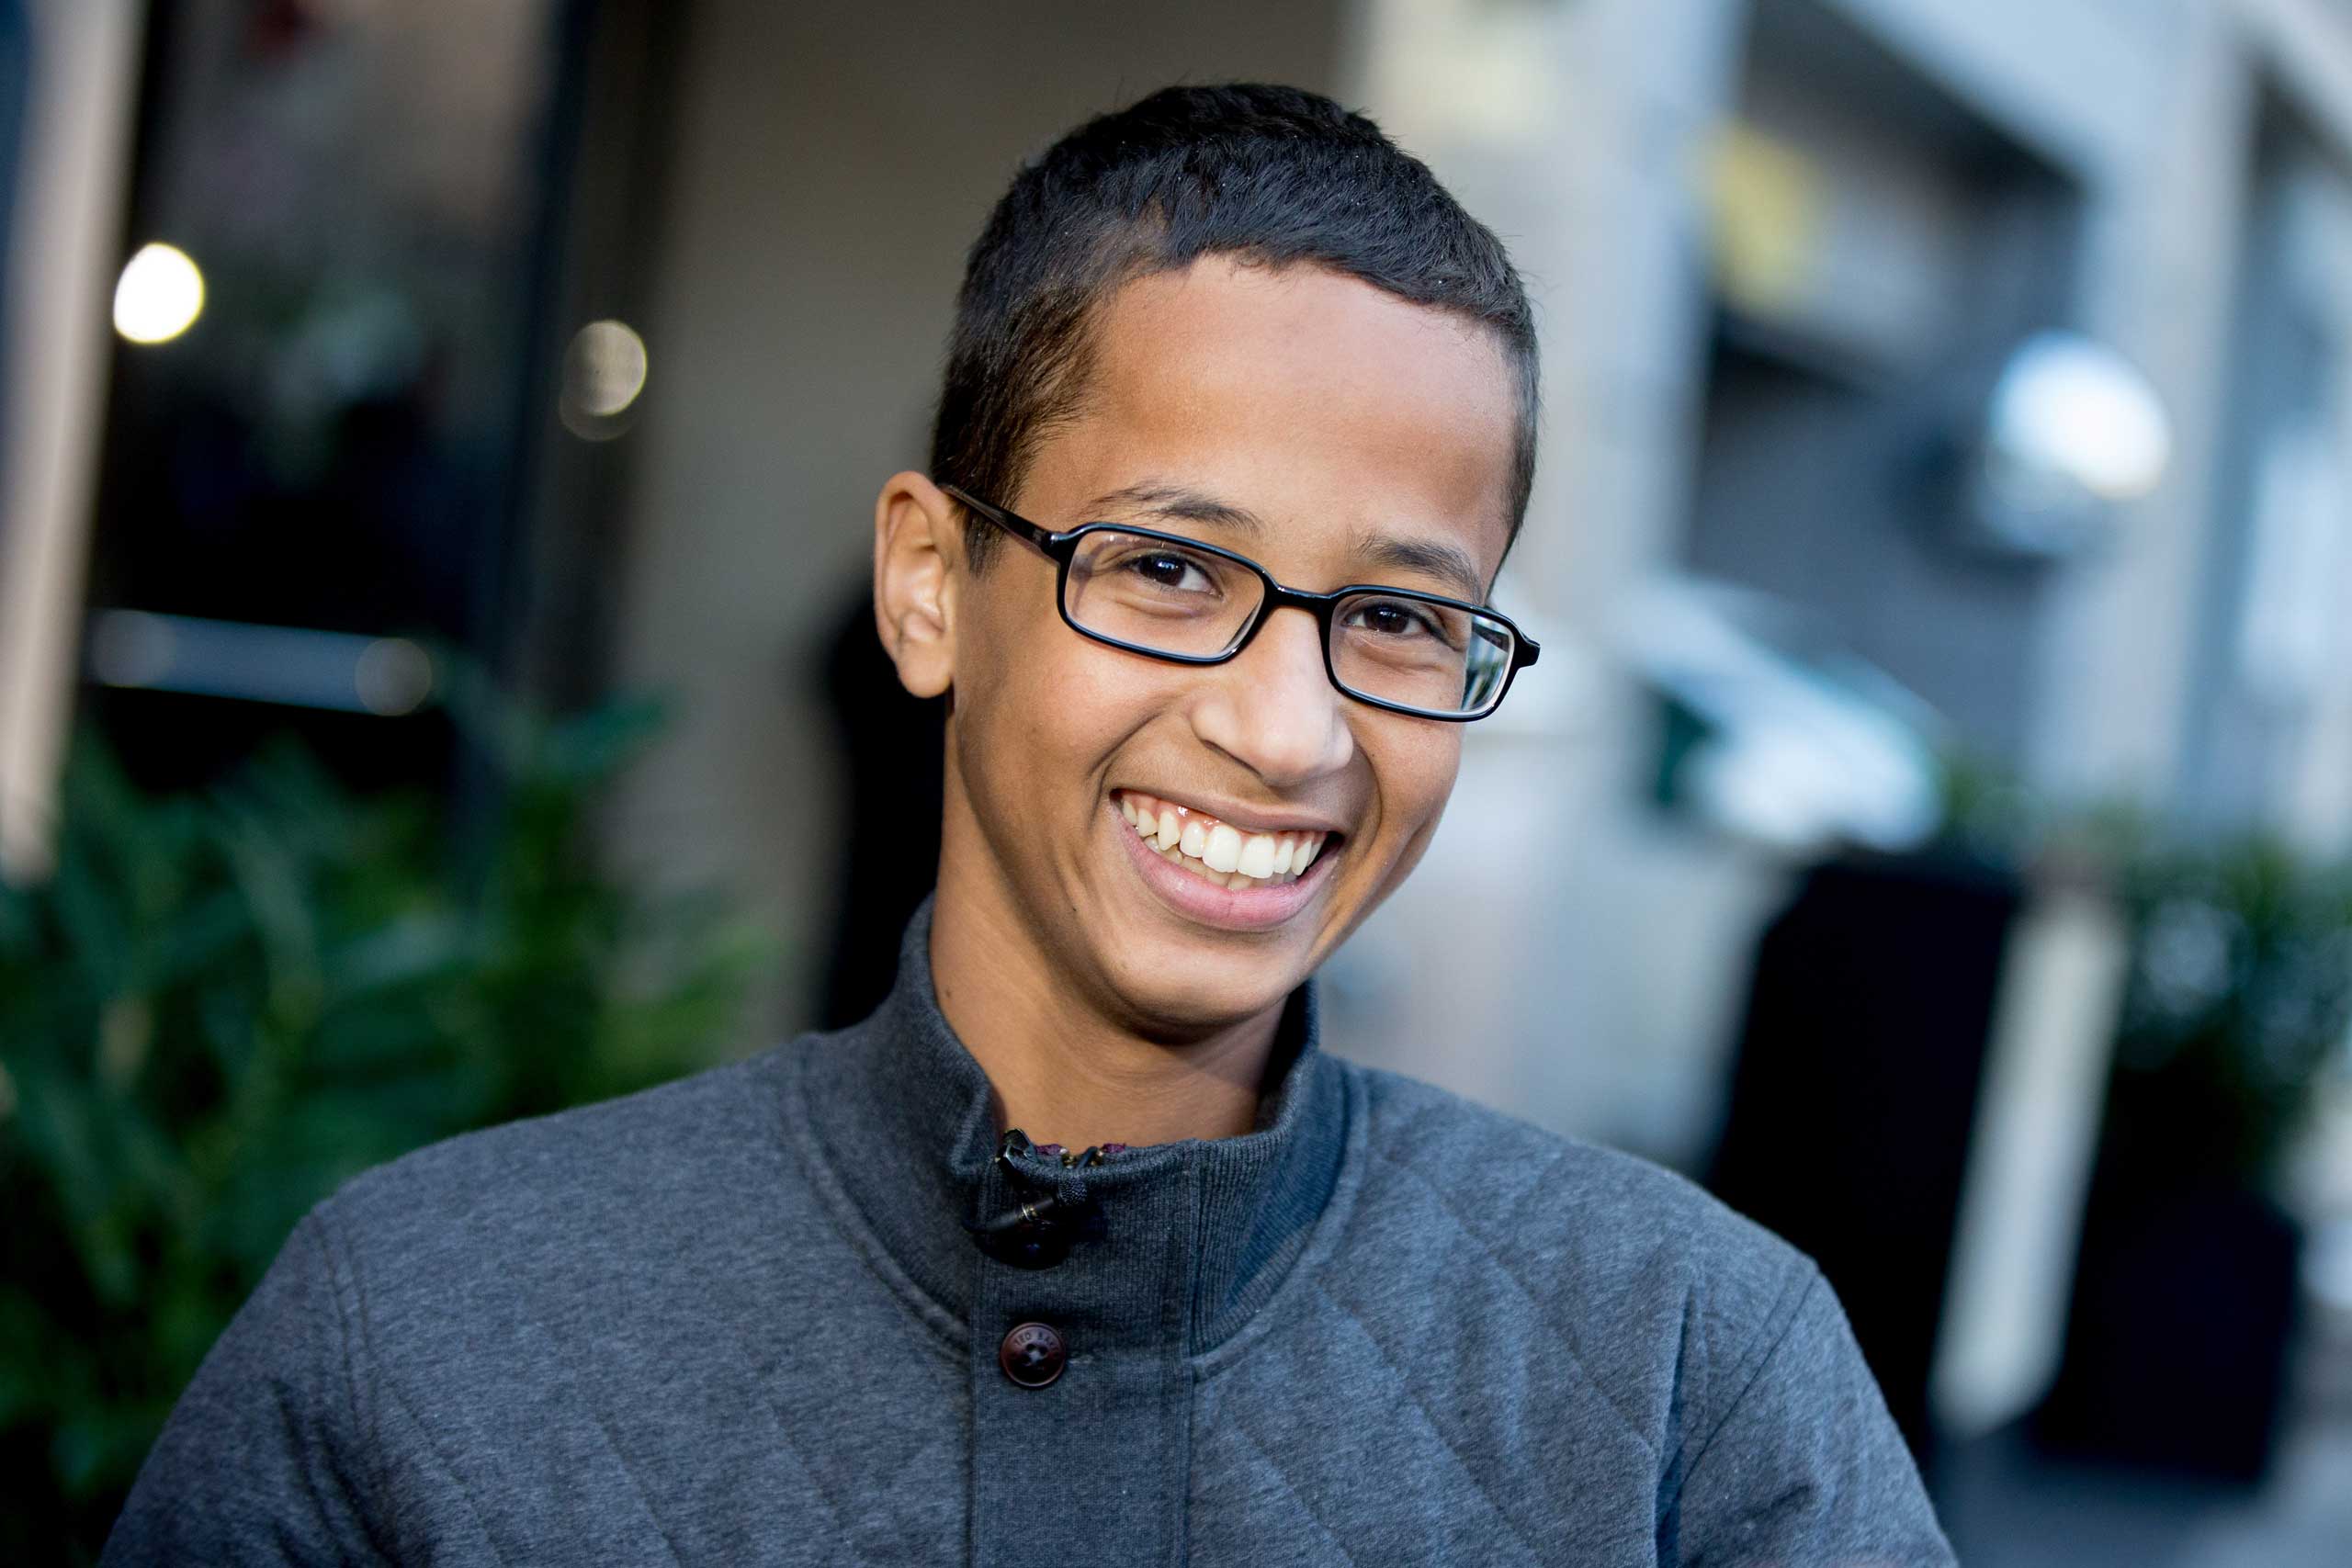 Ahmed Mohamed, the 14-year-old who was arrested at MacArthur High School in Irving, Texas for allegedly bringing a hoax bomb to school, speaks during an interview with the Associated Press, in Washington, Oct. 19, 2015. (Andrew Harnik—AP)